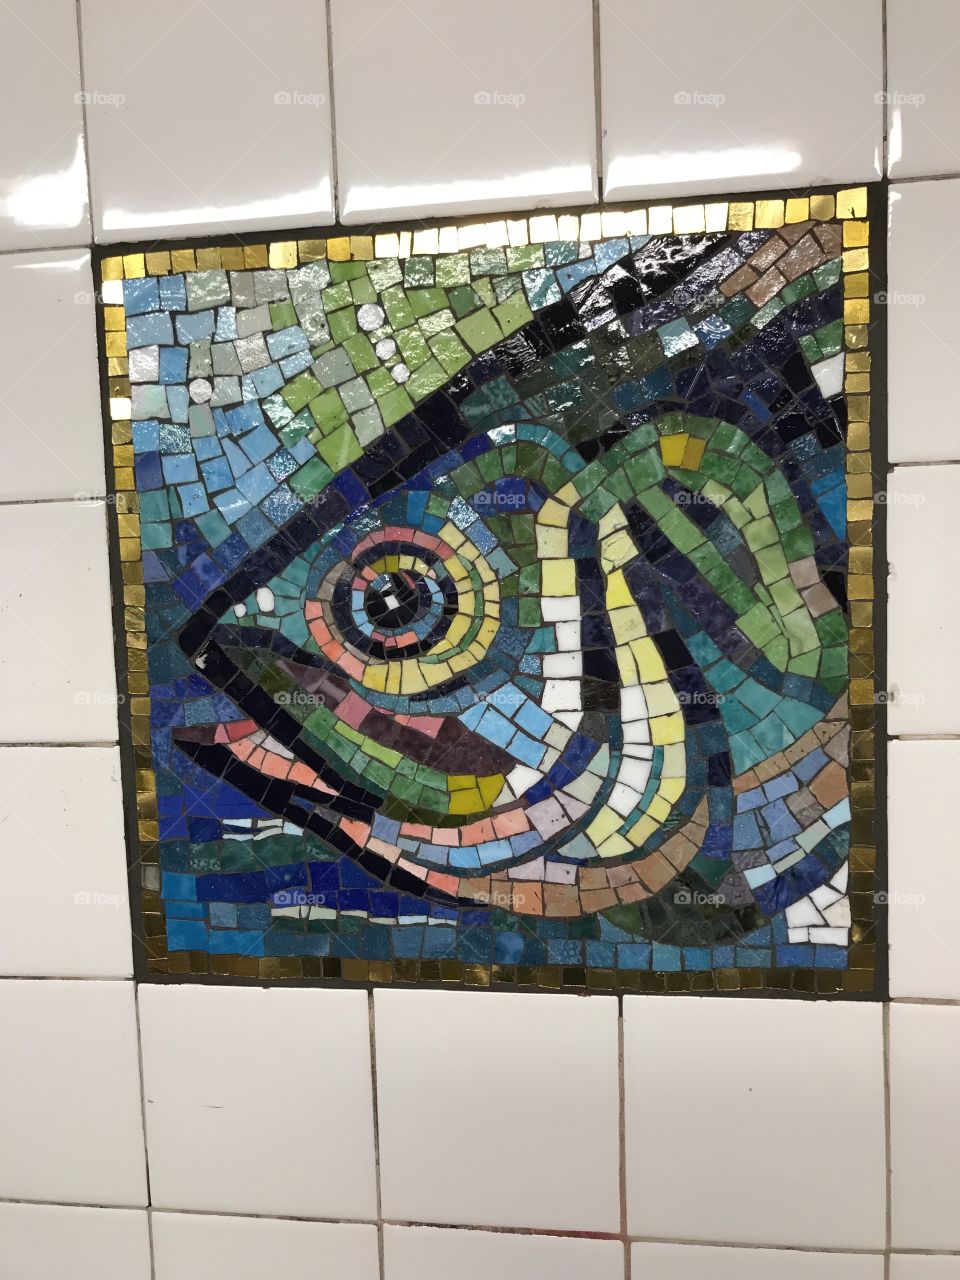 Fish in the NYC subway